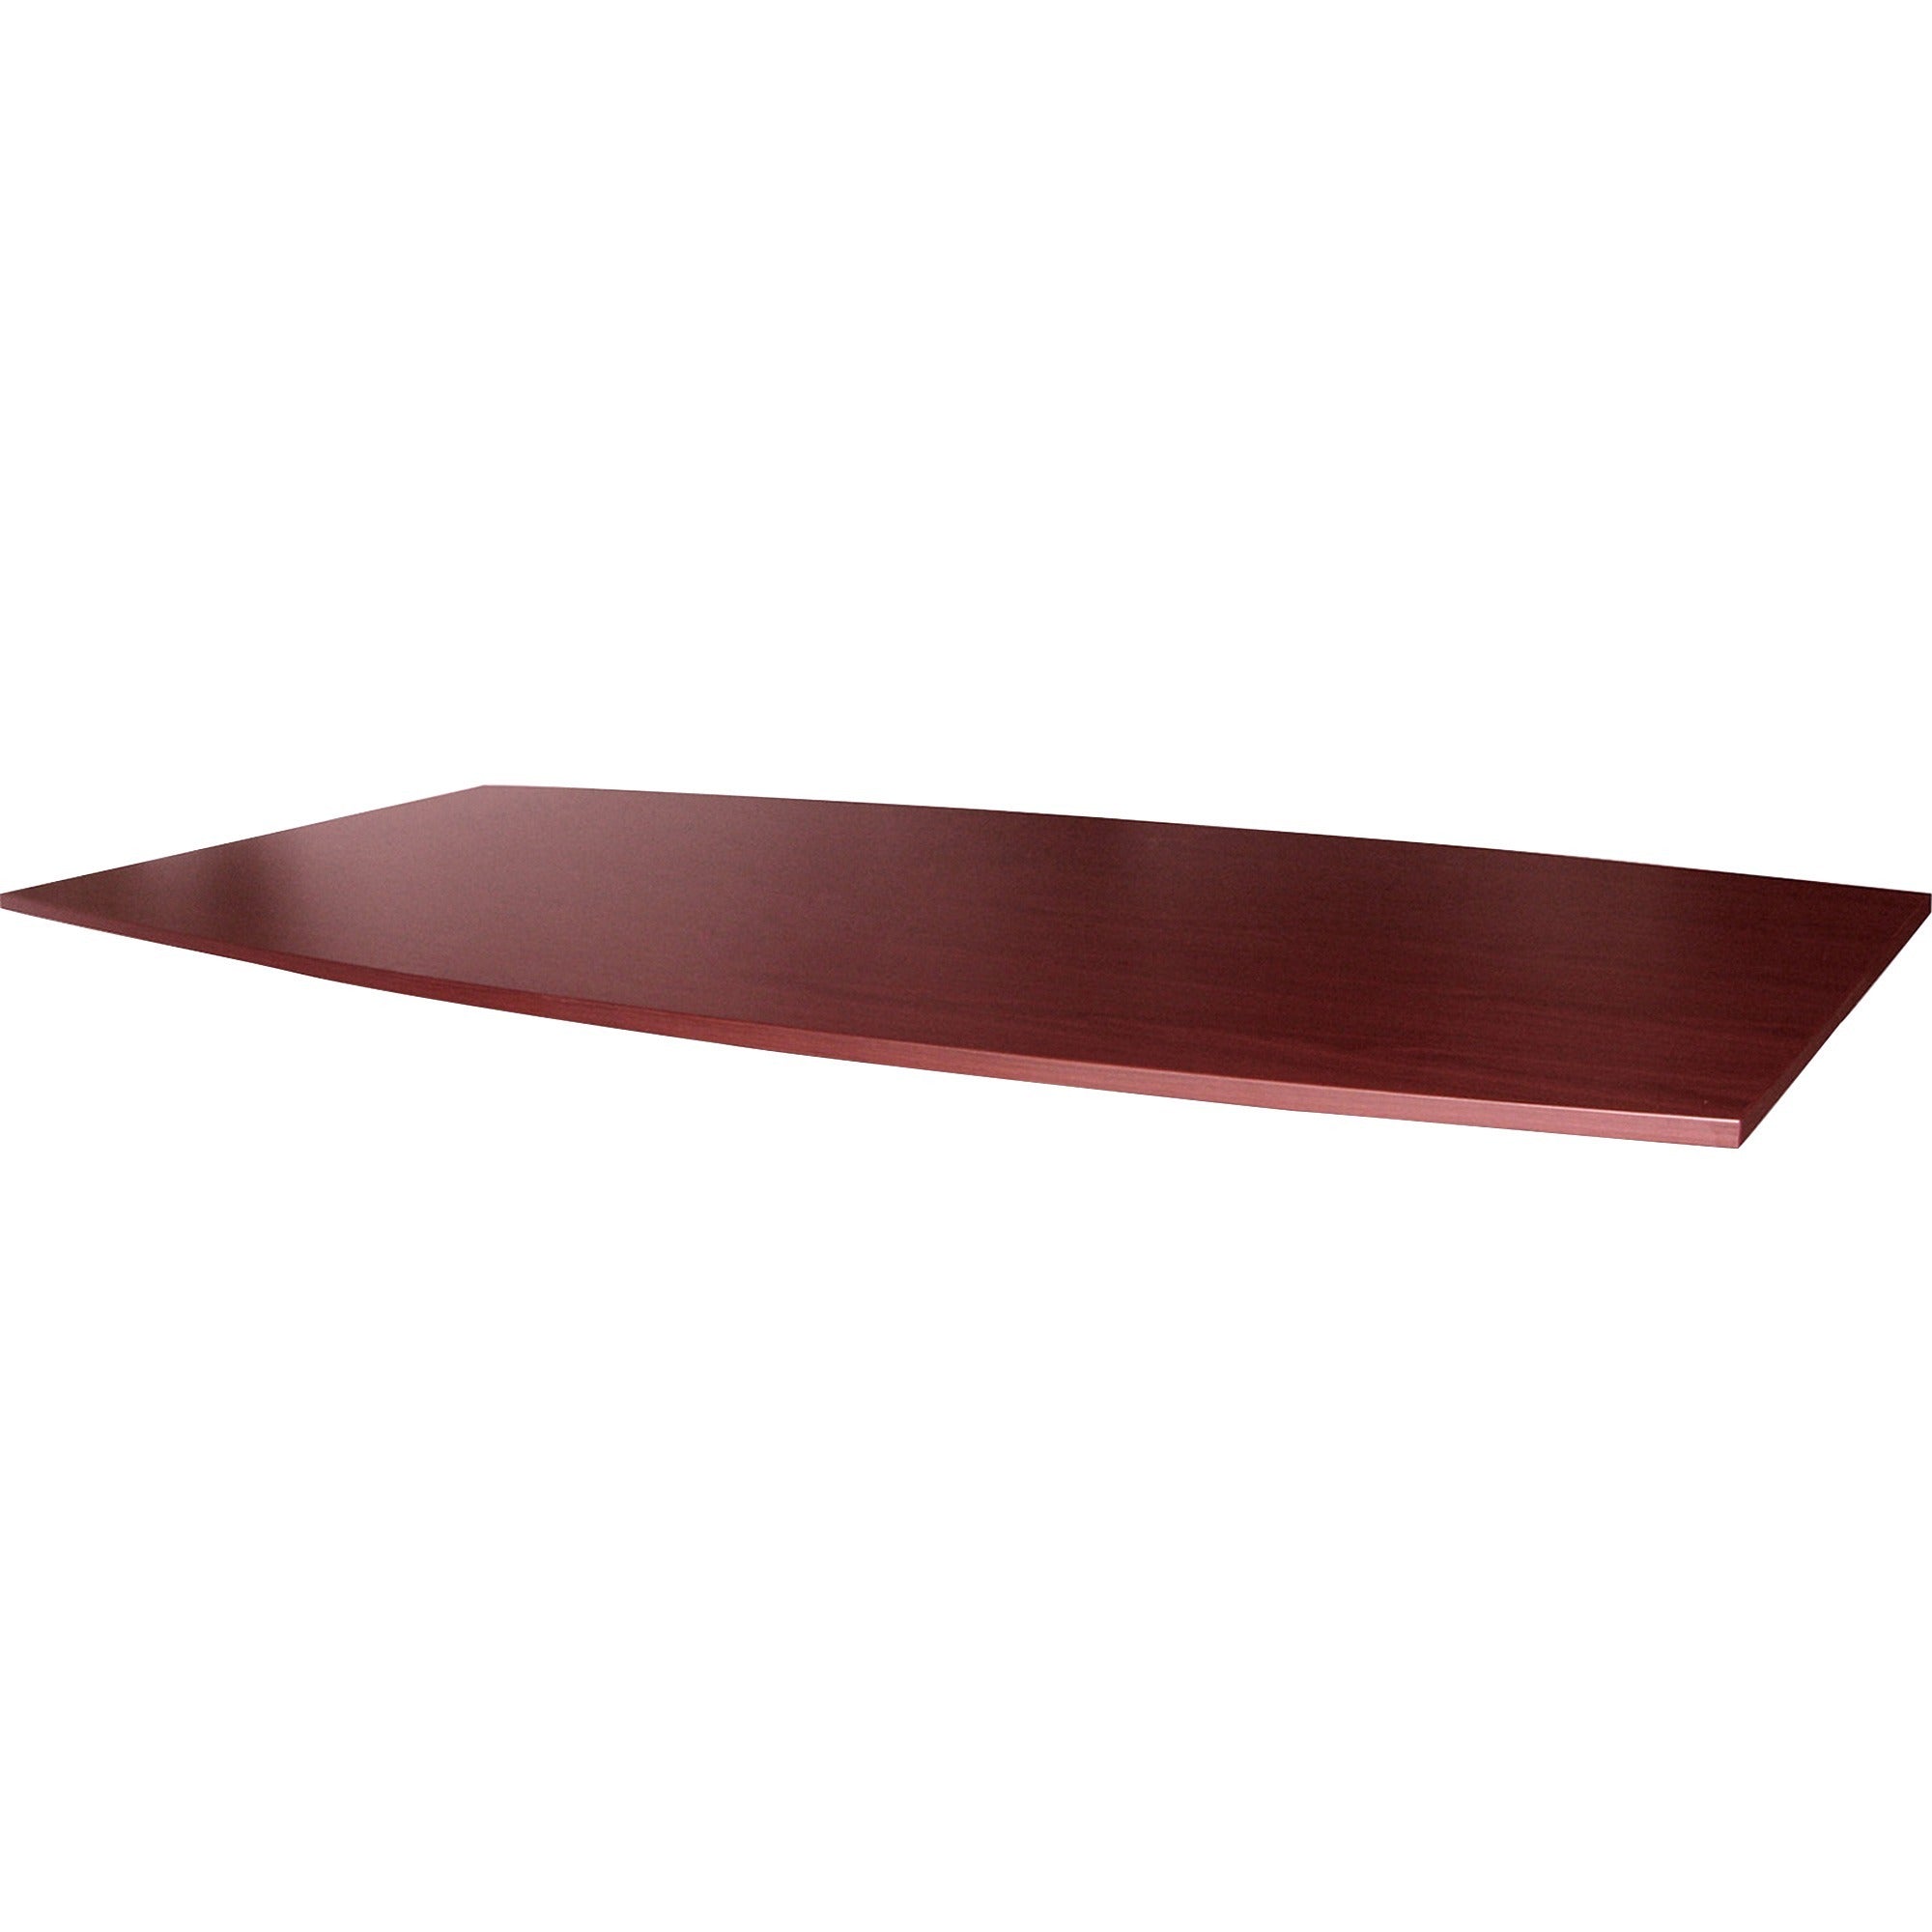 Lorell Essentials Boat-Shaped Conference Tabletop (Box 1 of 2) - For - Table TopBoat Top x 48" Table Top Width x 96" Table Top Depth x 1.25" Table Top Thickness - 1" Height x 94.50" Width x 47.25" Depth - Assembly Required - Mahogany - 1 Each - 1